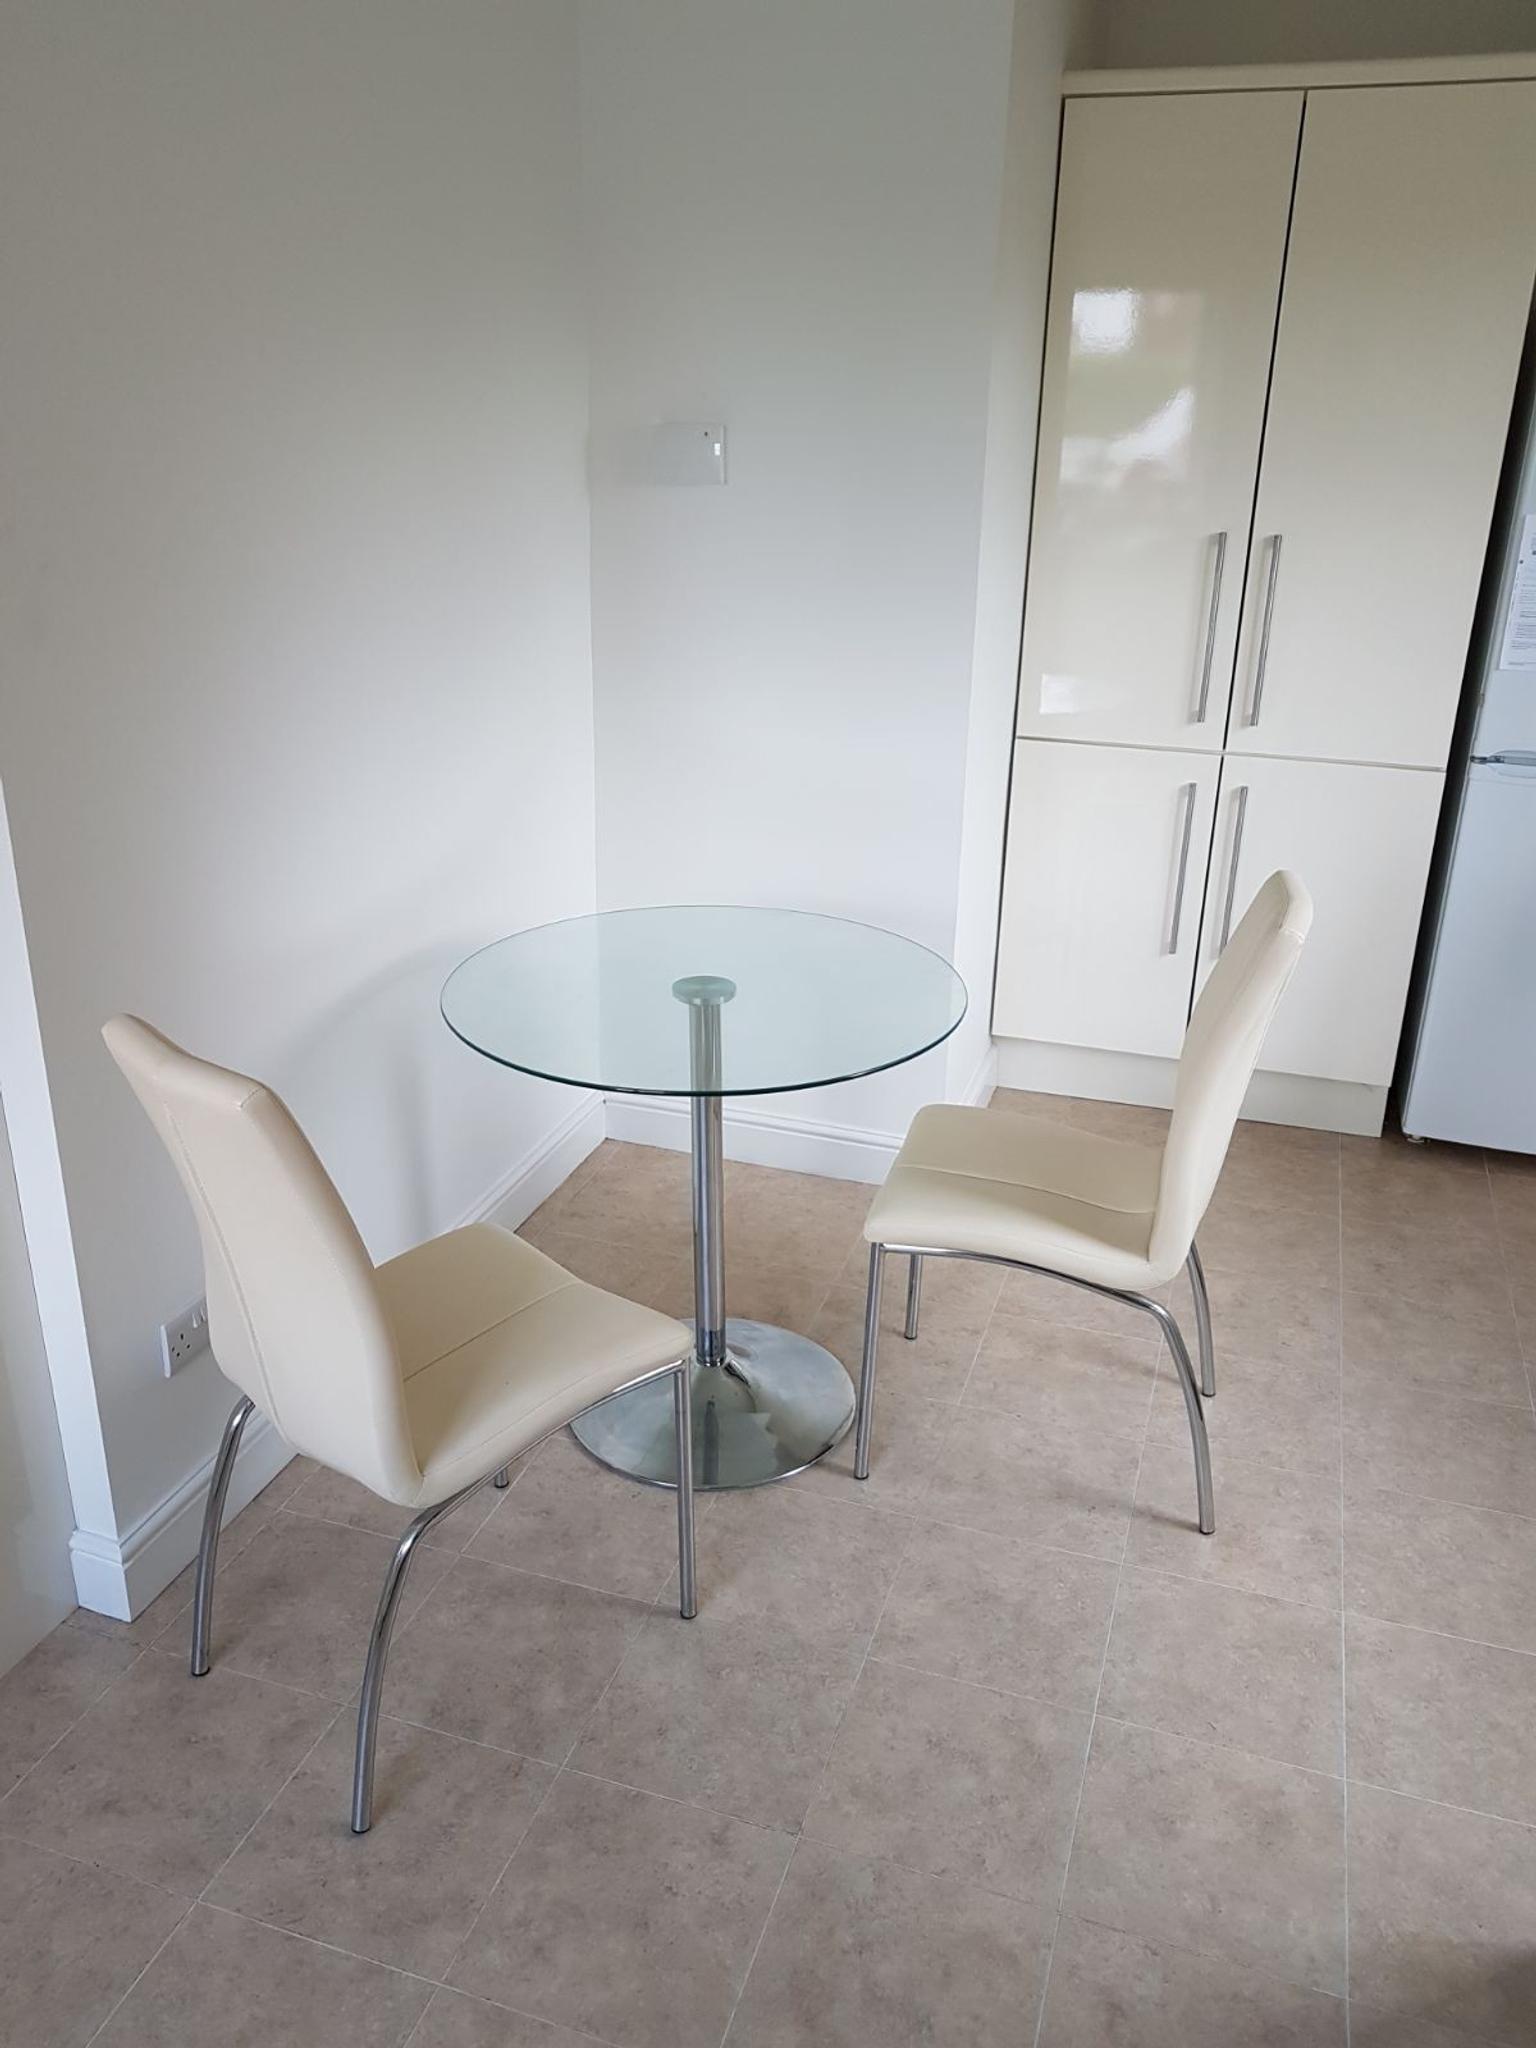 Glass Dining Table And Two Chairs In Ng12 Rushcliffe Fur 50 00 Zum Verkauf Shpock De